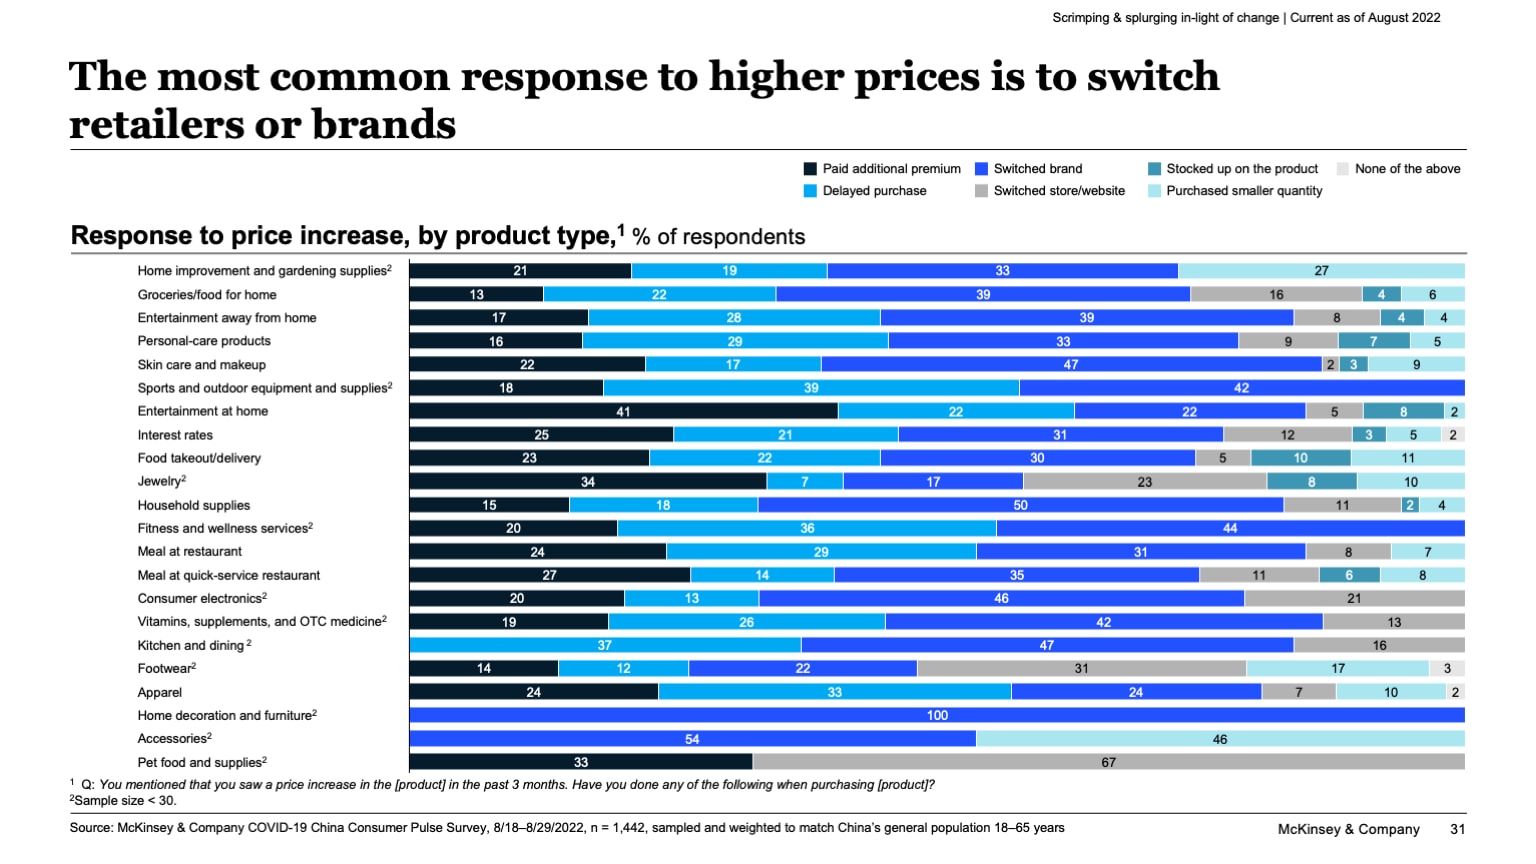 The most common response to higher prices is to switch retailers or brands